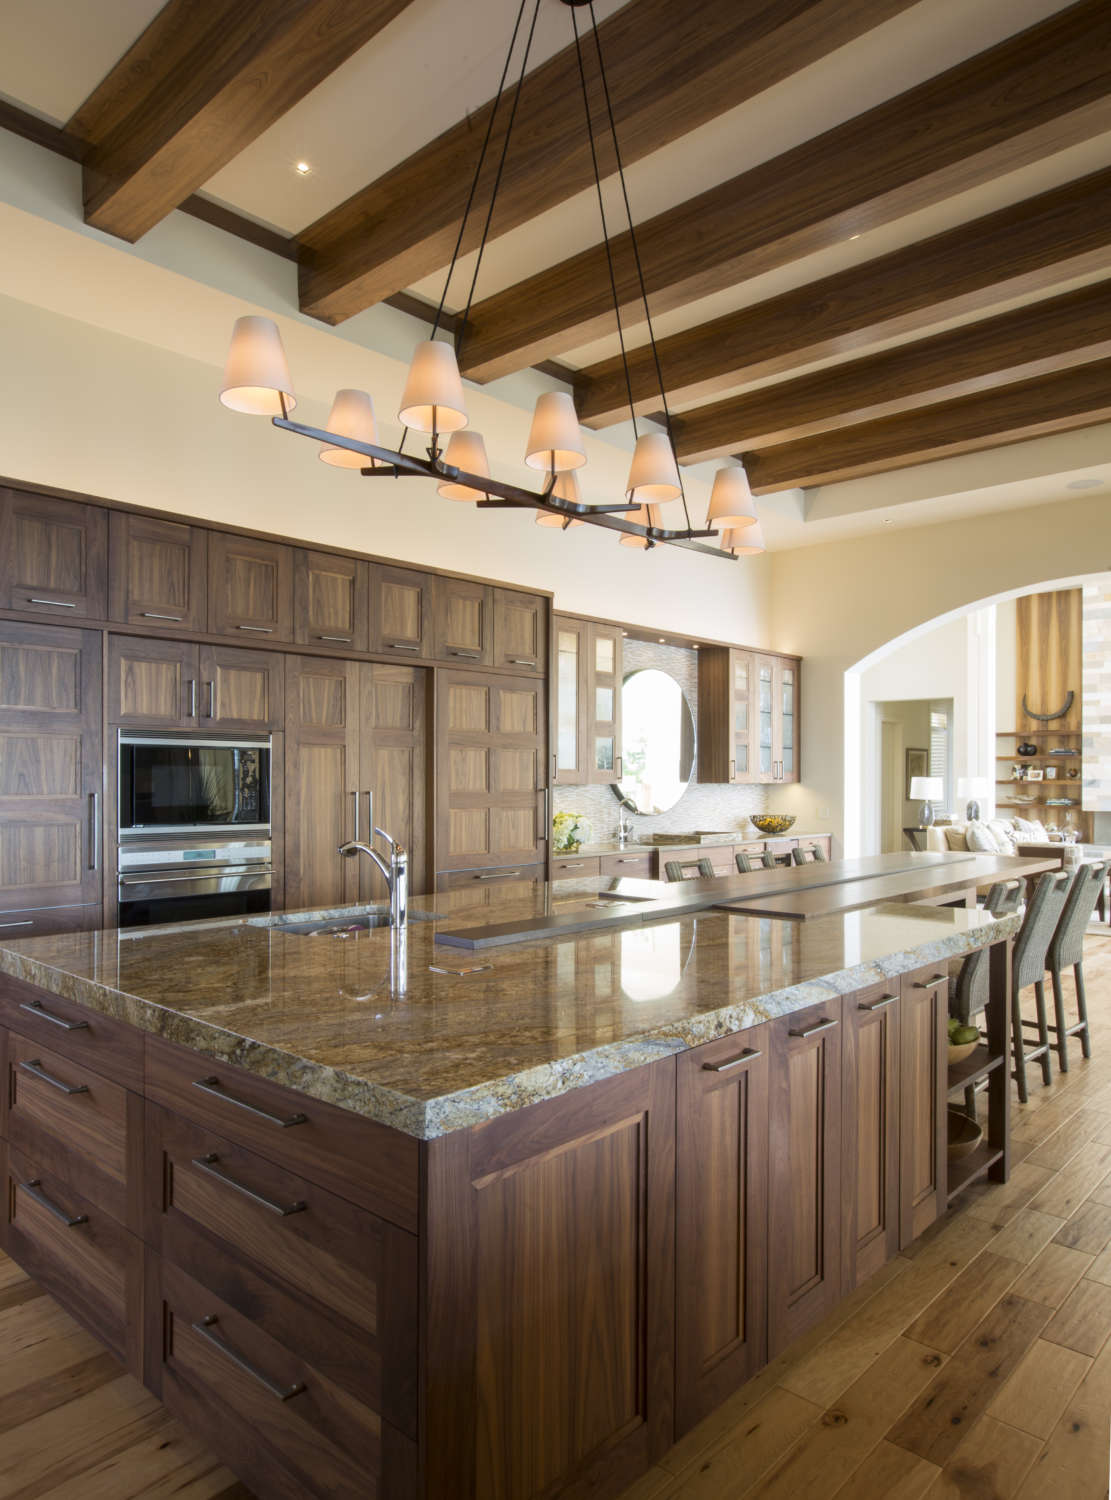 Classic kitchen features natural walnut Rutt cabinetry, custom island with Juparana granite countertop and pine flooring.